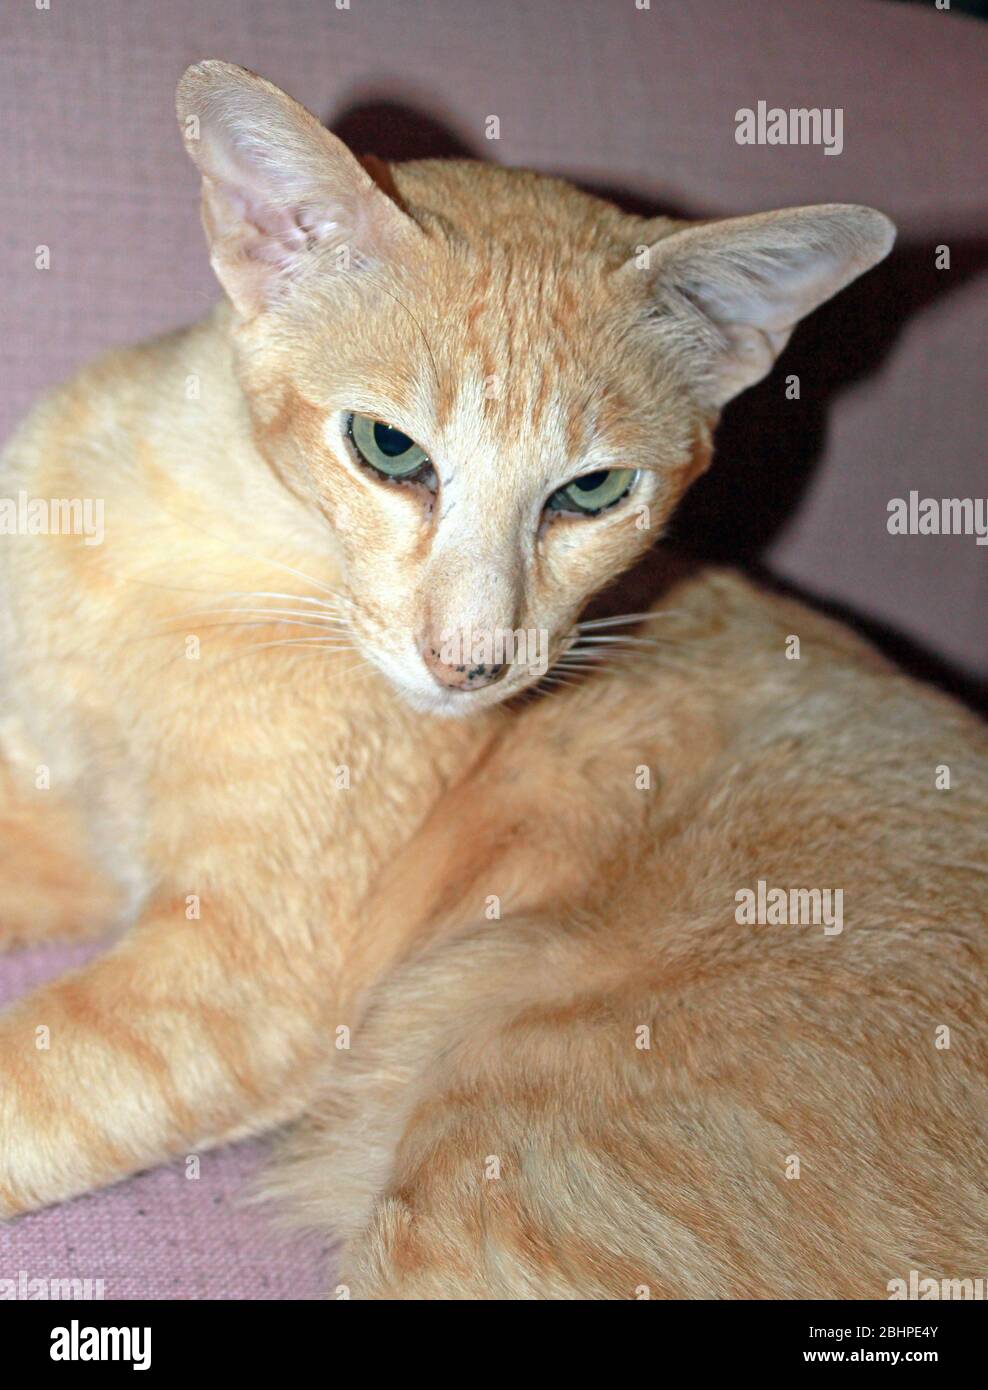 Orinetal/Siamese red spotted tabby cat Stock Photo